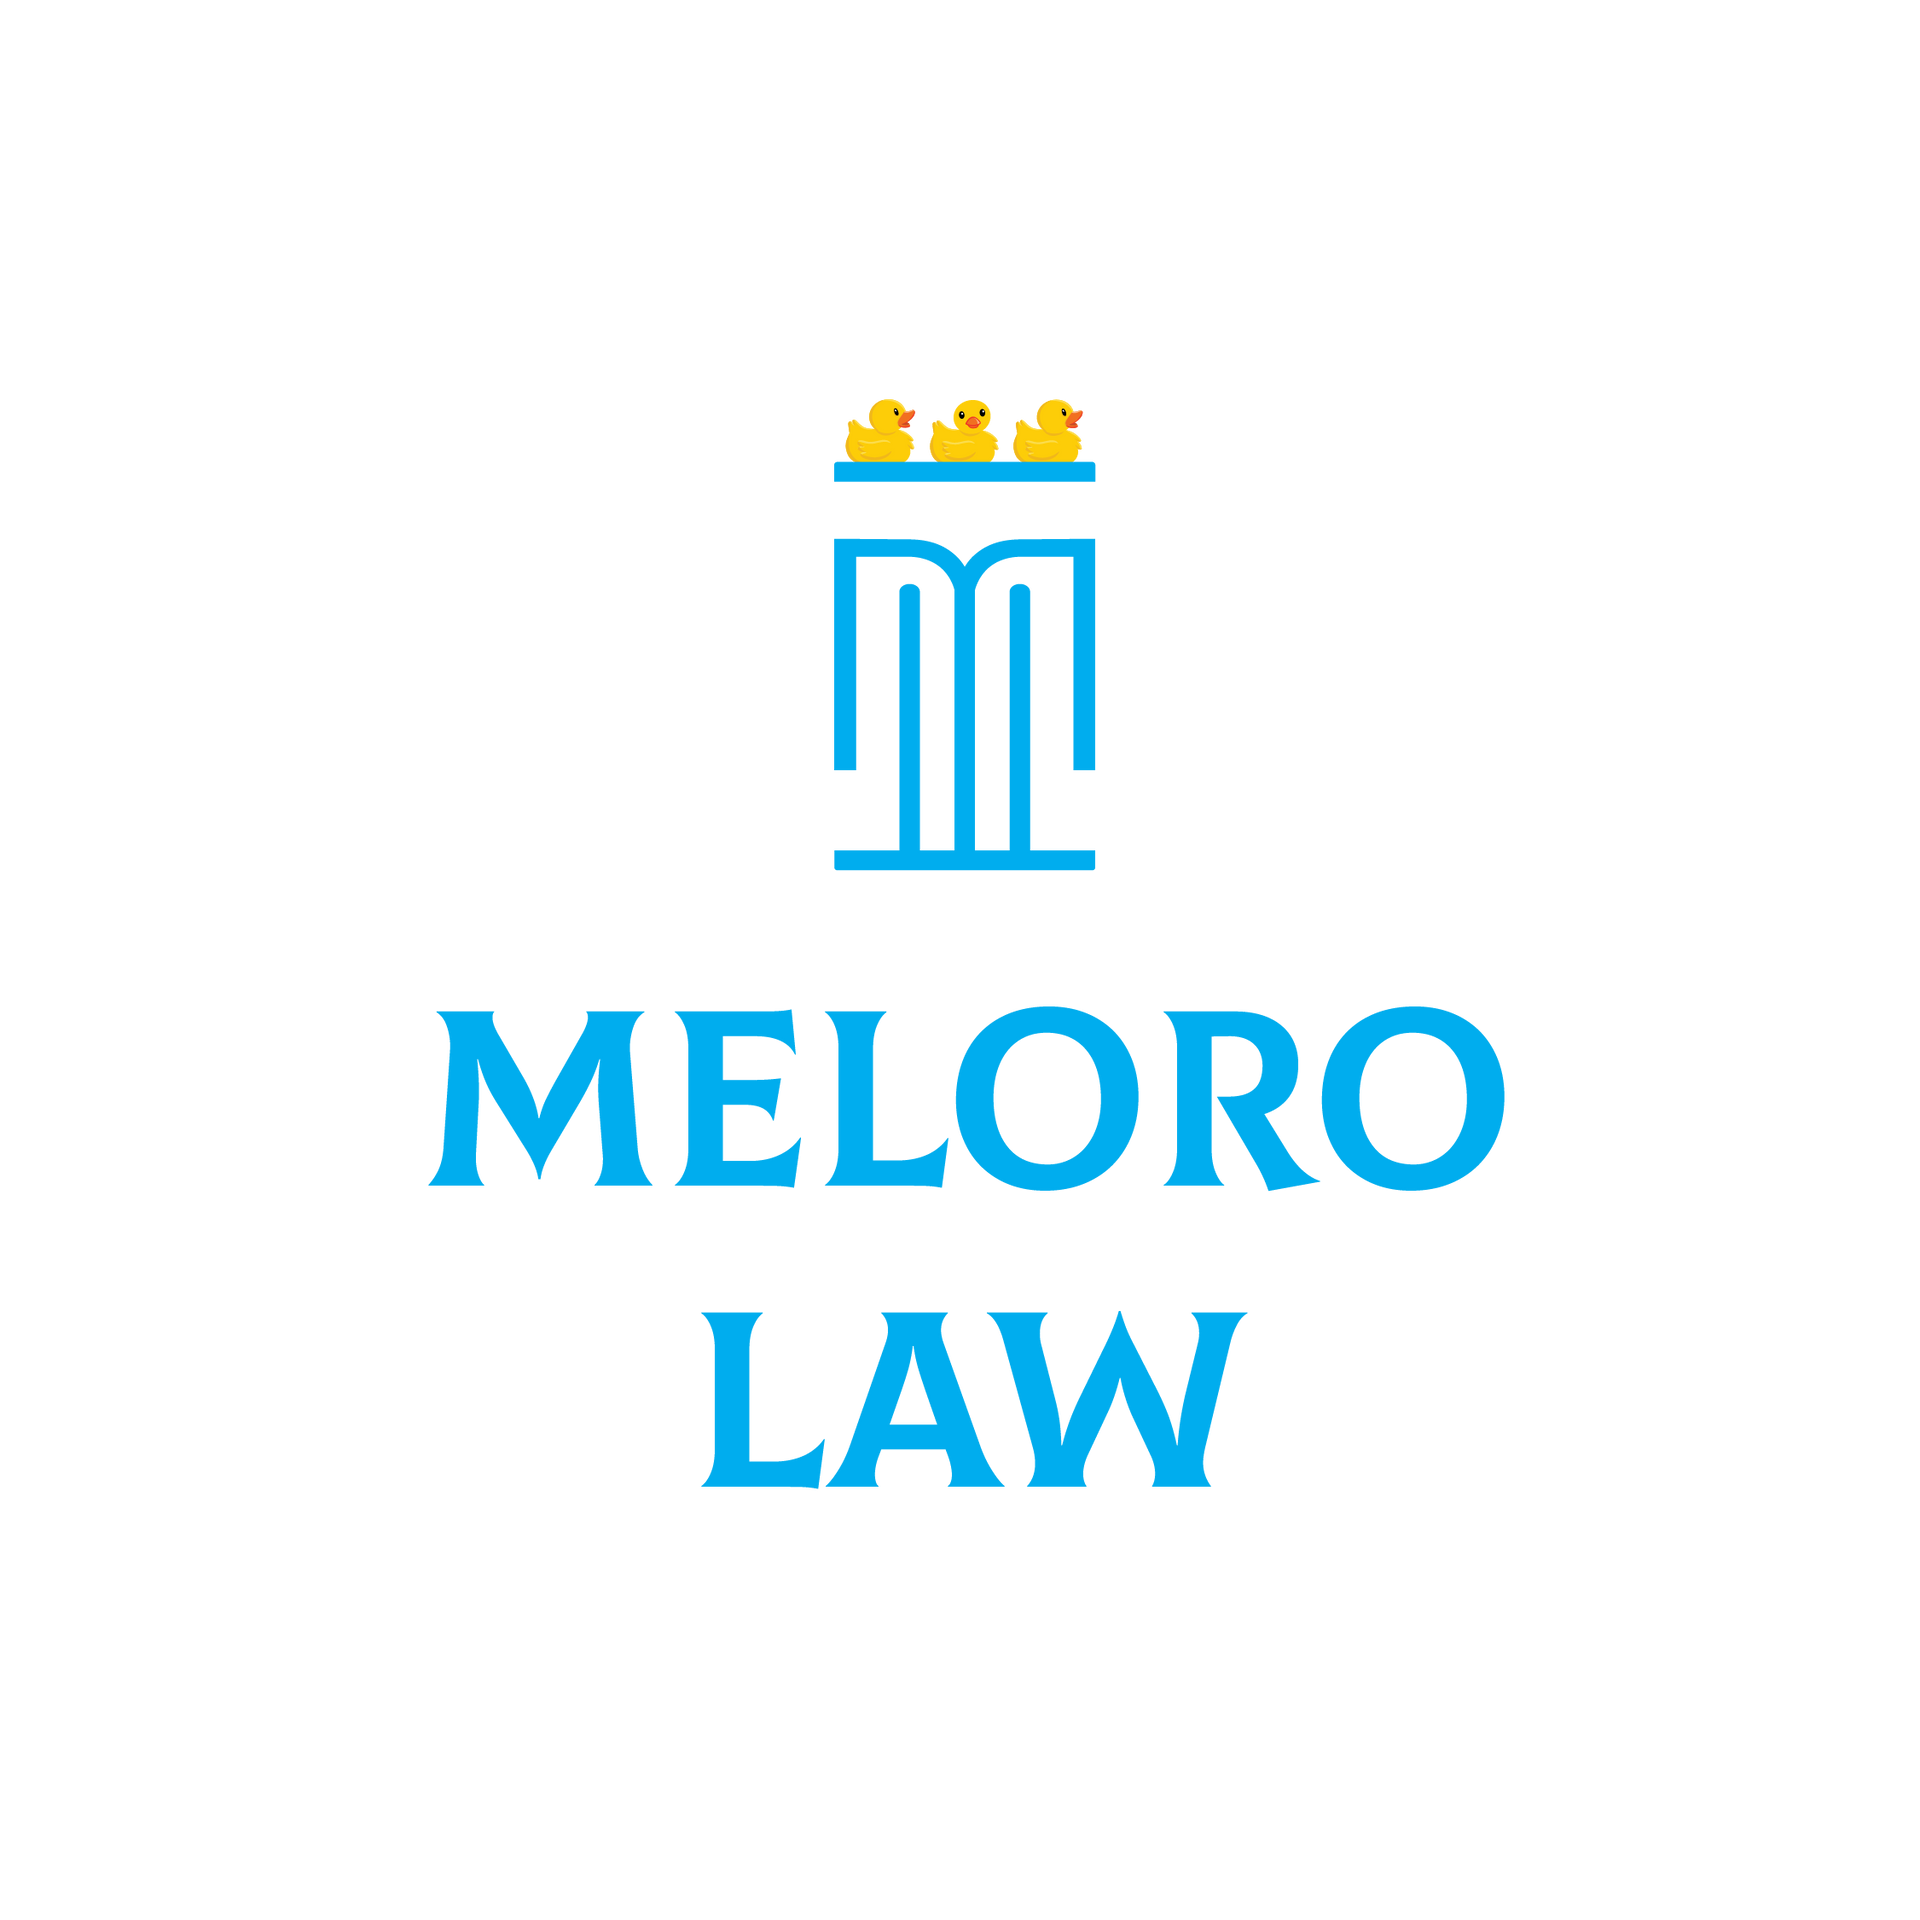 A logo for a law firm called meloro law